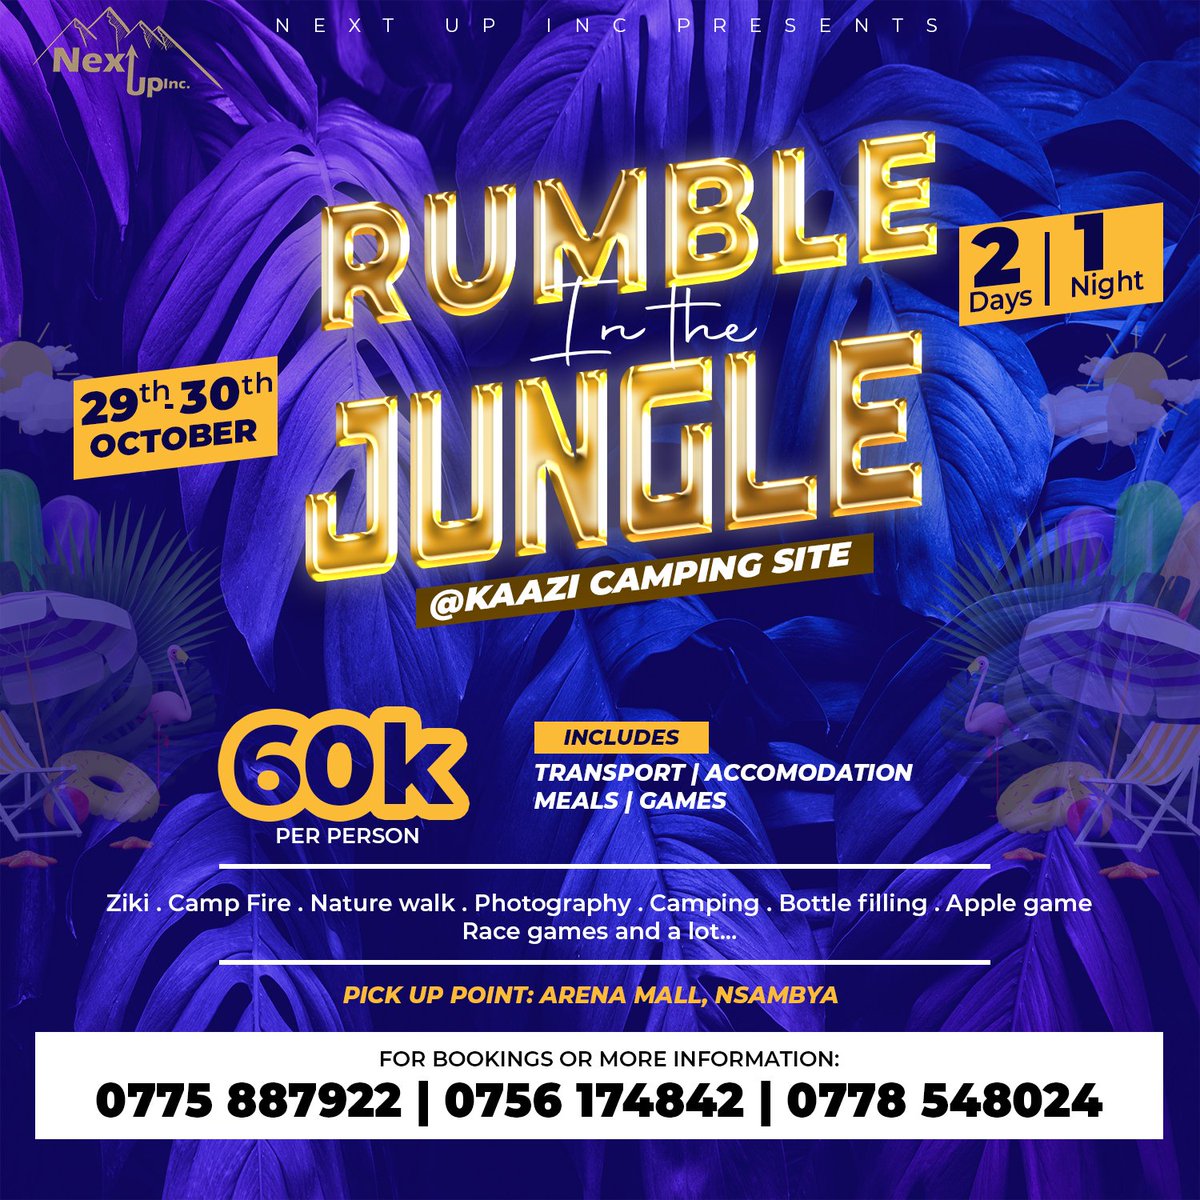 If you don't fun time...
Which other affordable trip would you?!
#rumbleinthejungle #nextupInc